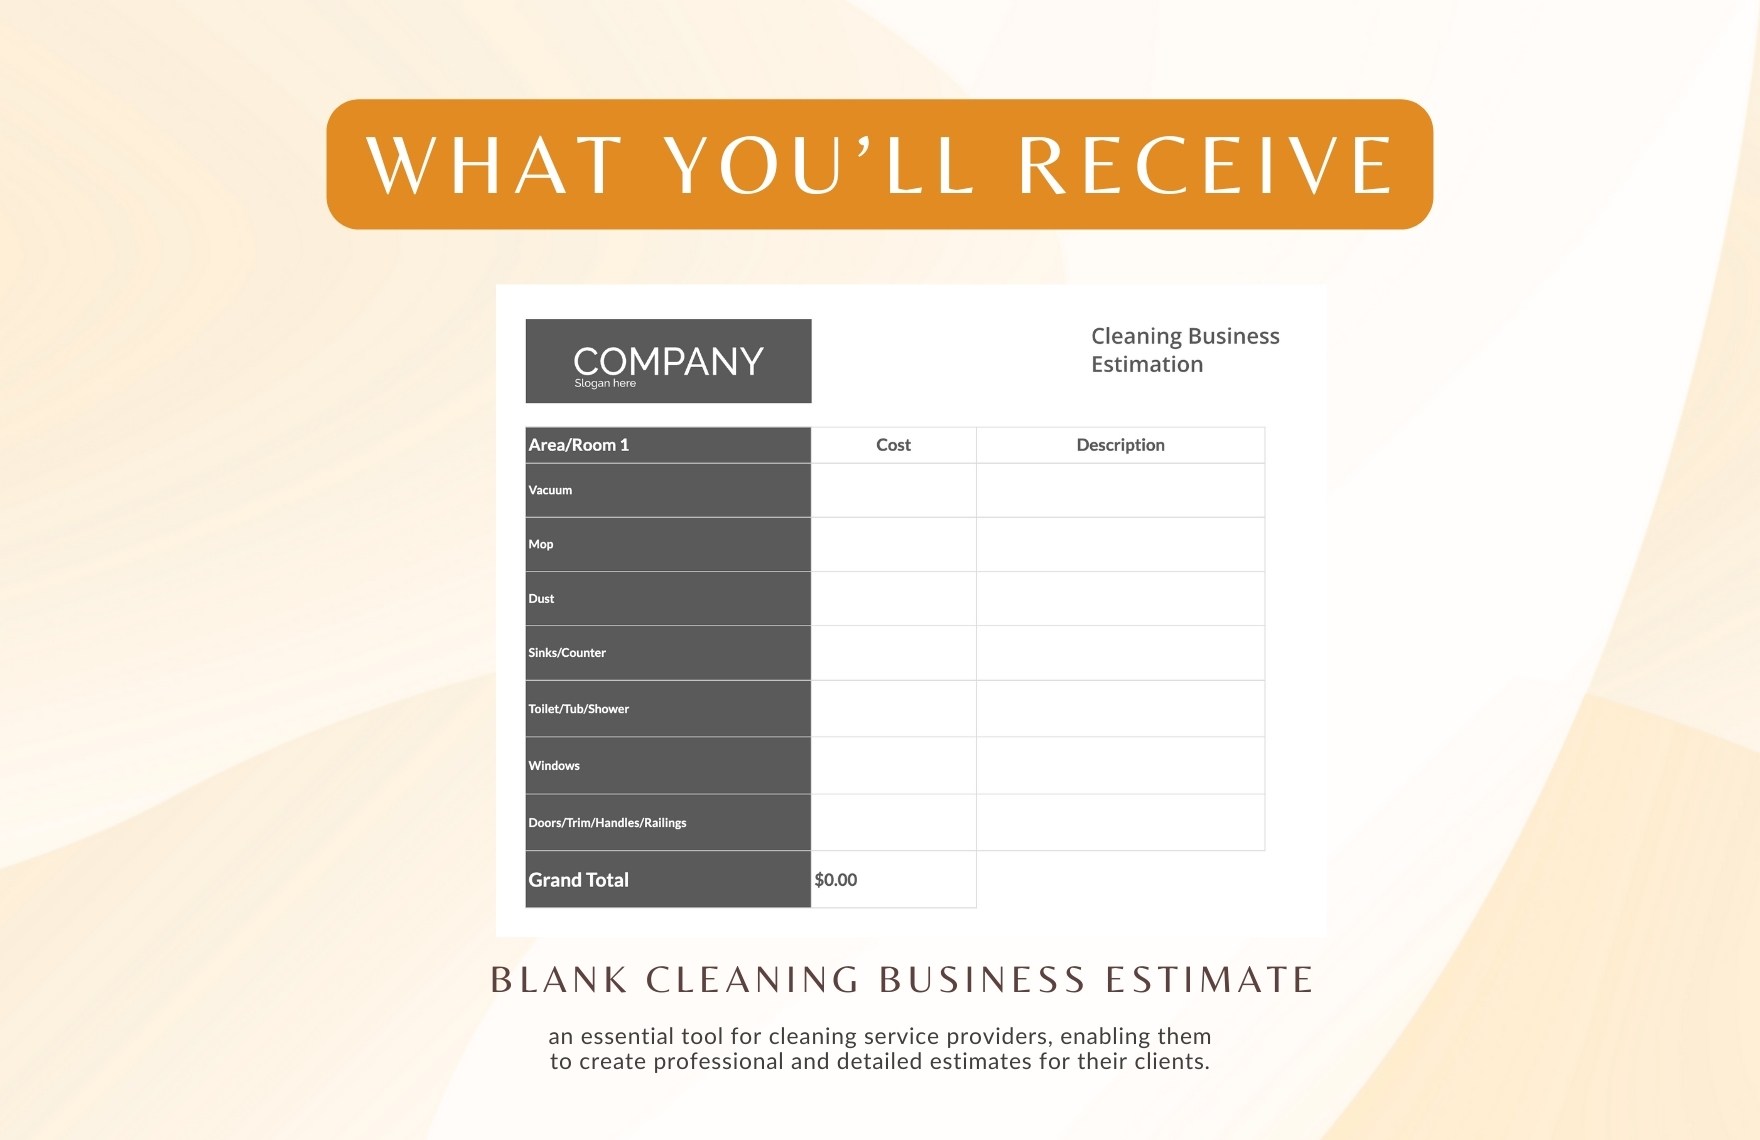 Blank Cleaning Business Estimate Template